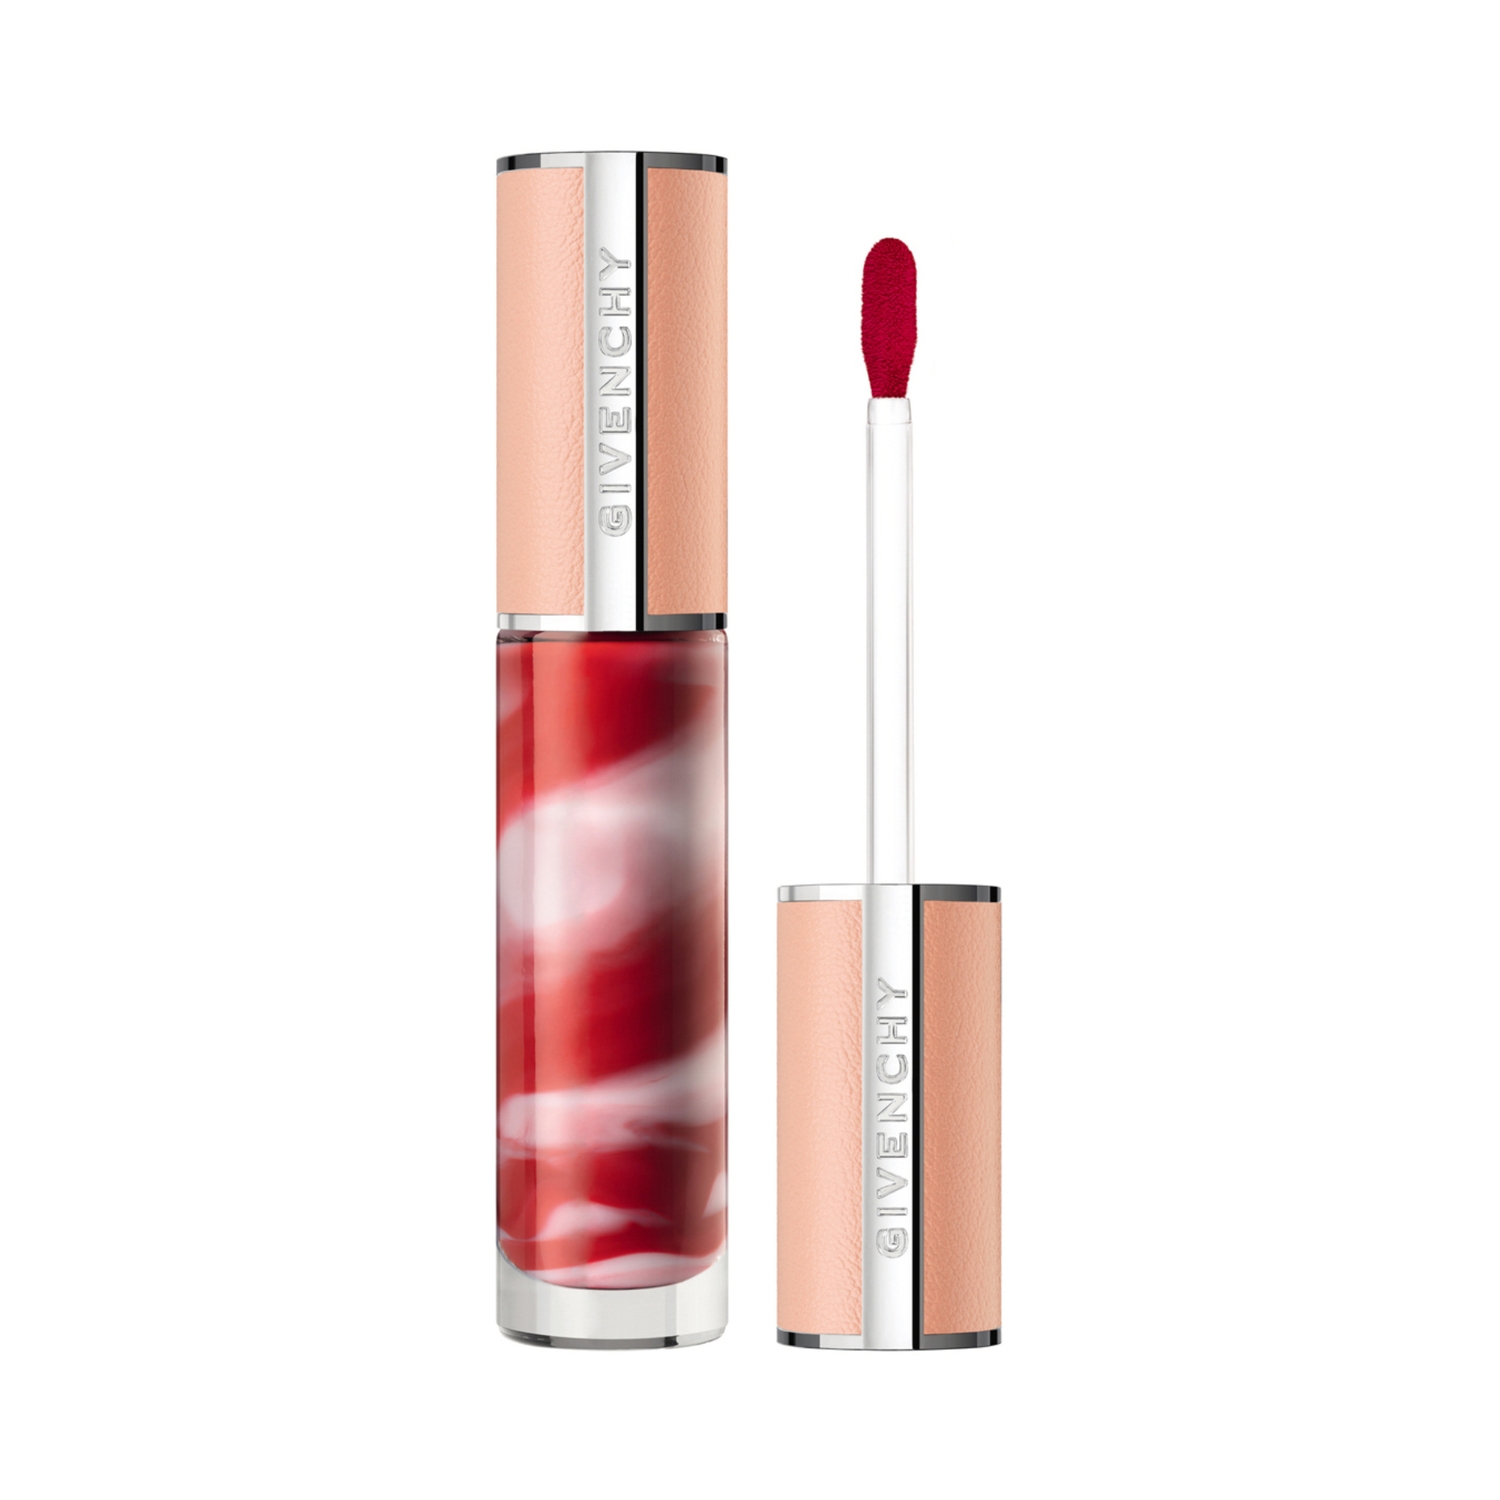 Givenchy | Givenchy Rose Perfecto Liquid Lip Balm - N 37 Rouge Graine (6ml)